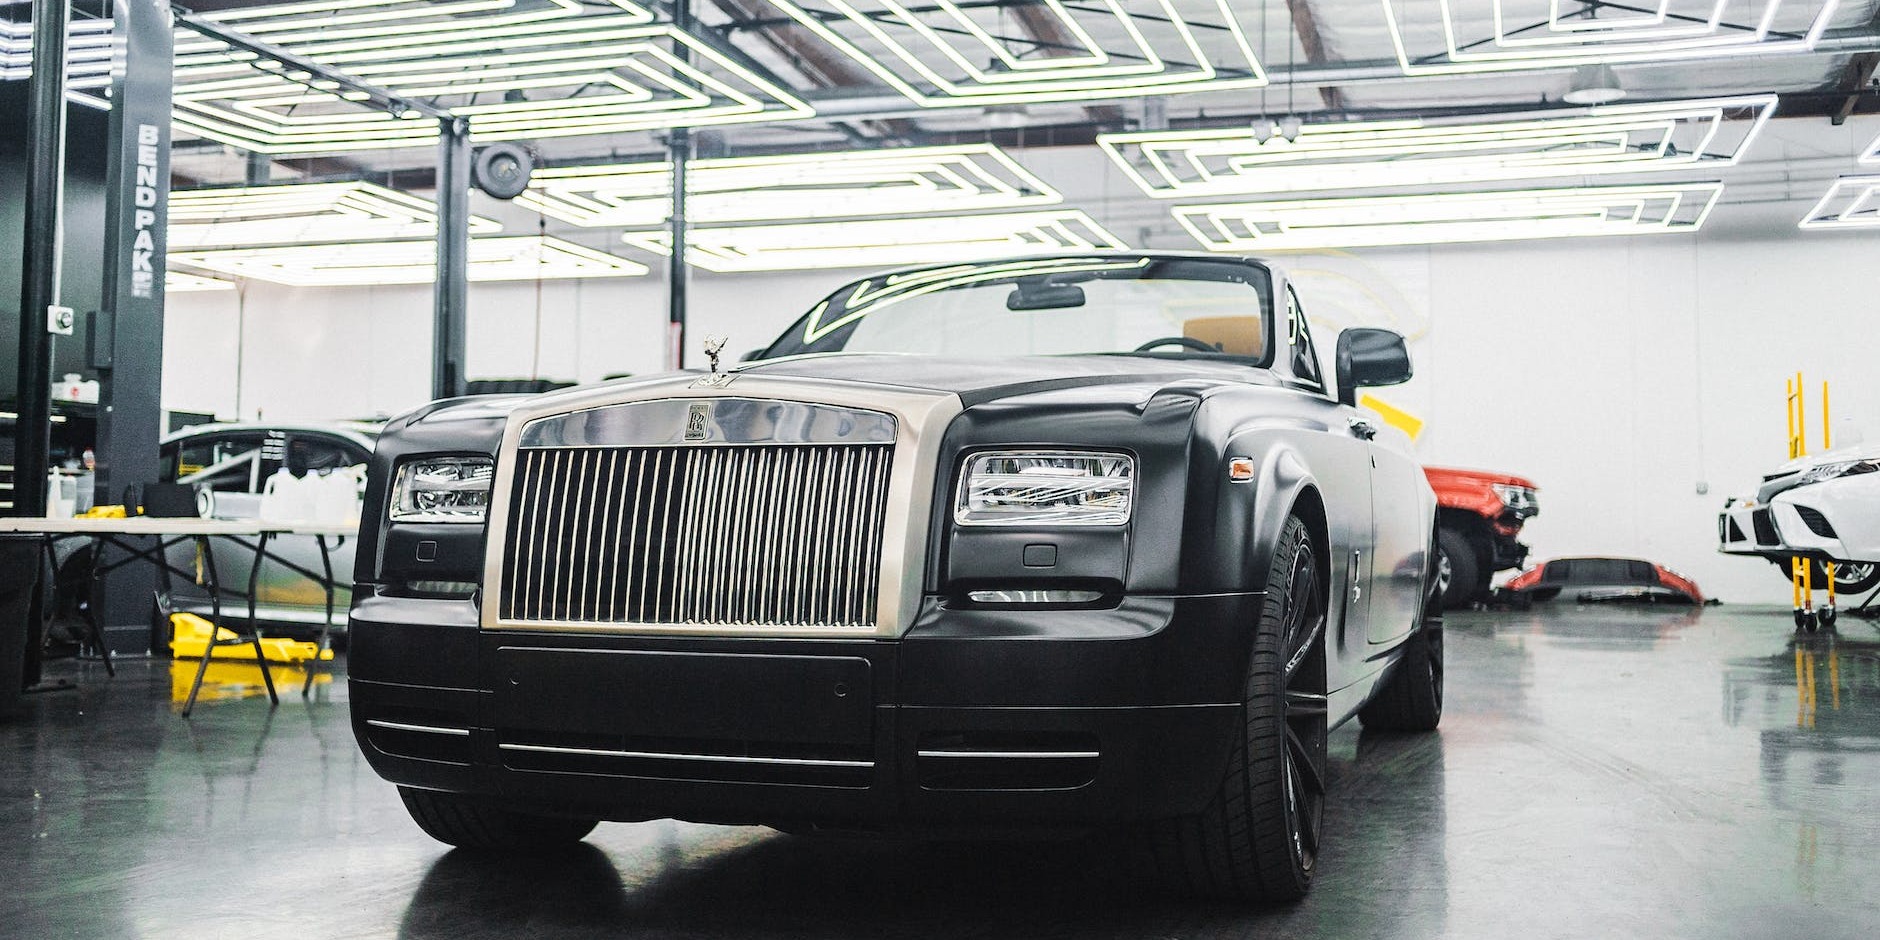 Maintaining the Elegance: Top Tips for Caring for Your Rolls Royce in the UK